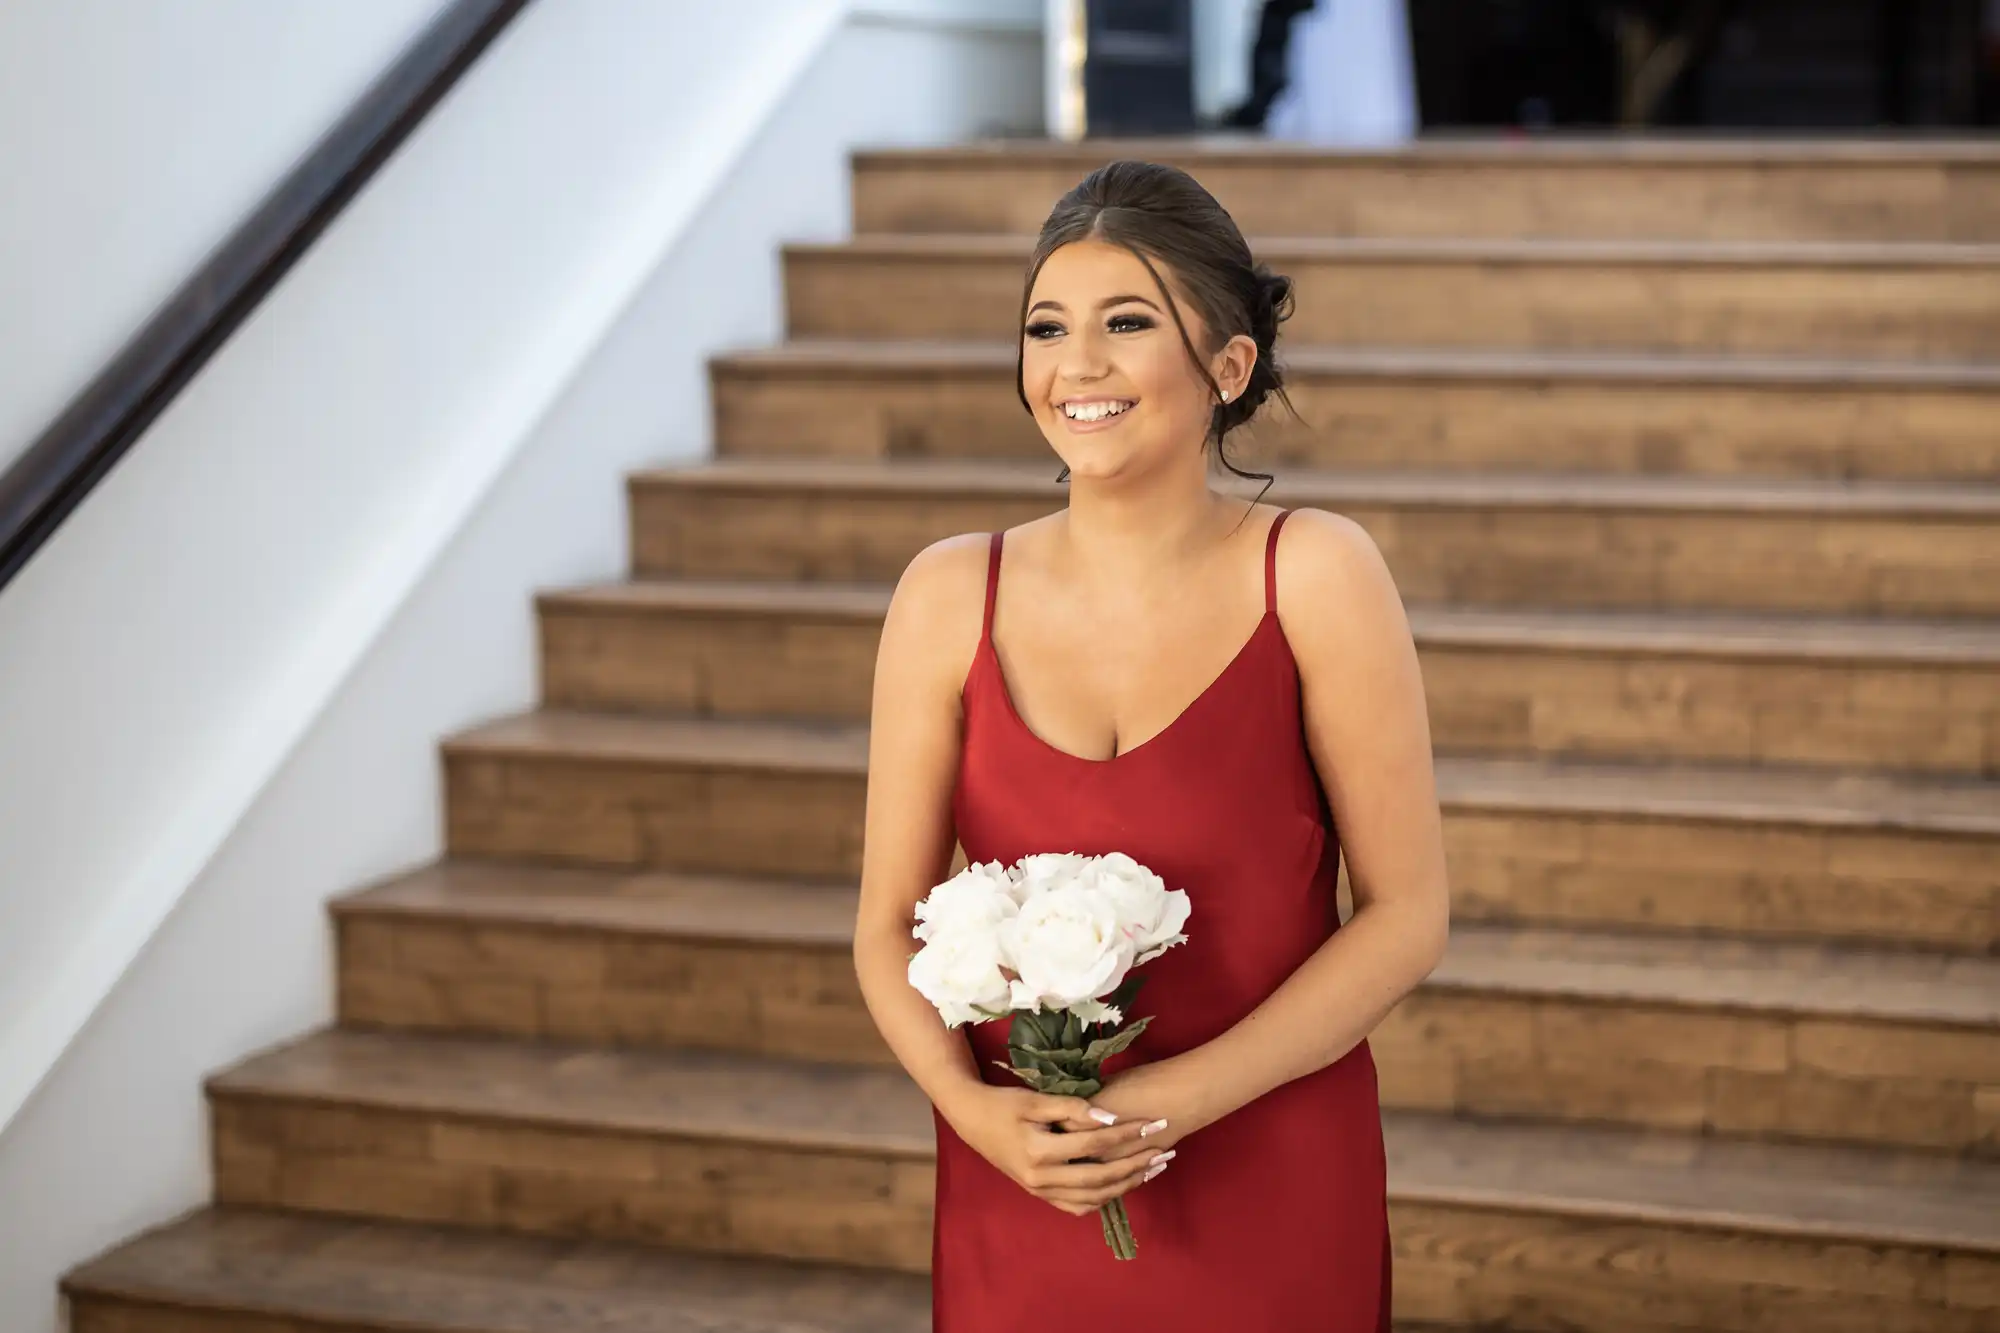 A woman in a red dress holds a bouquet of white flowers while standing on a wooden staircase, smiling.